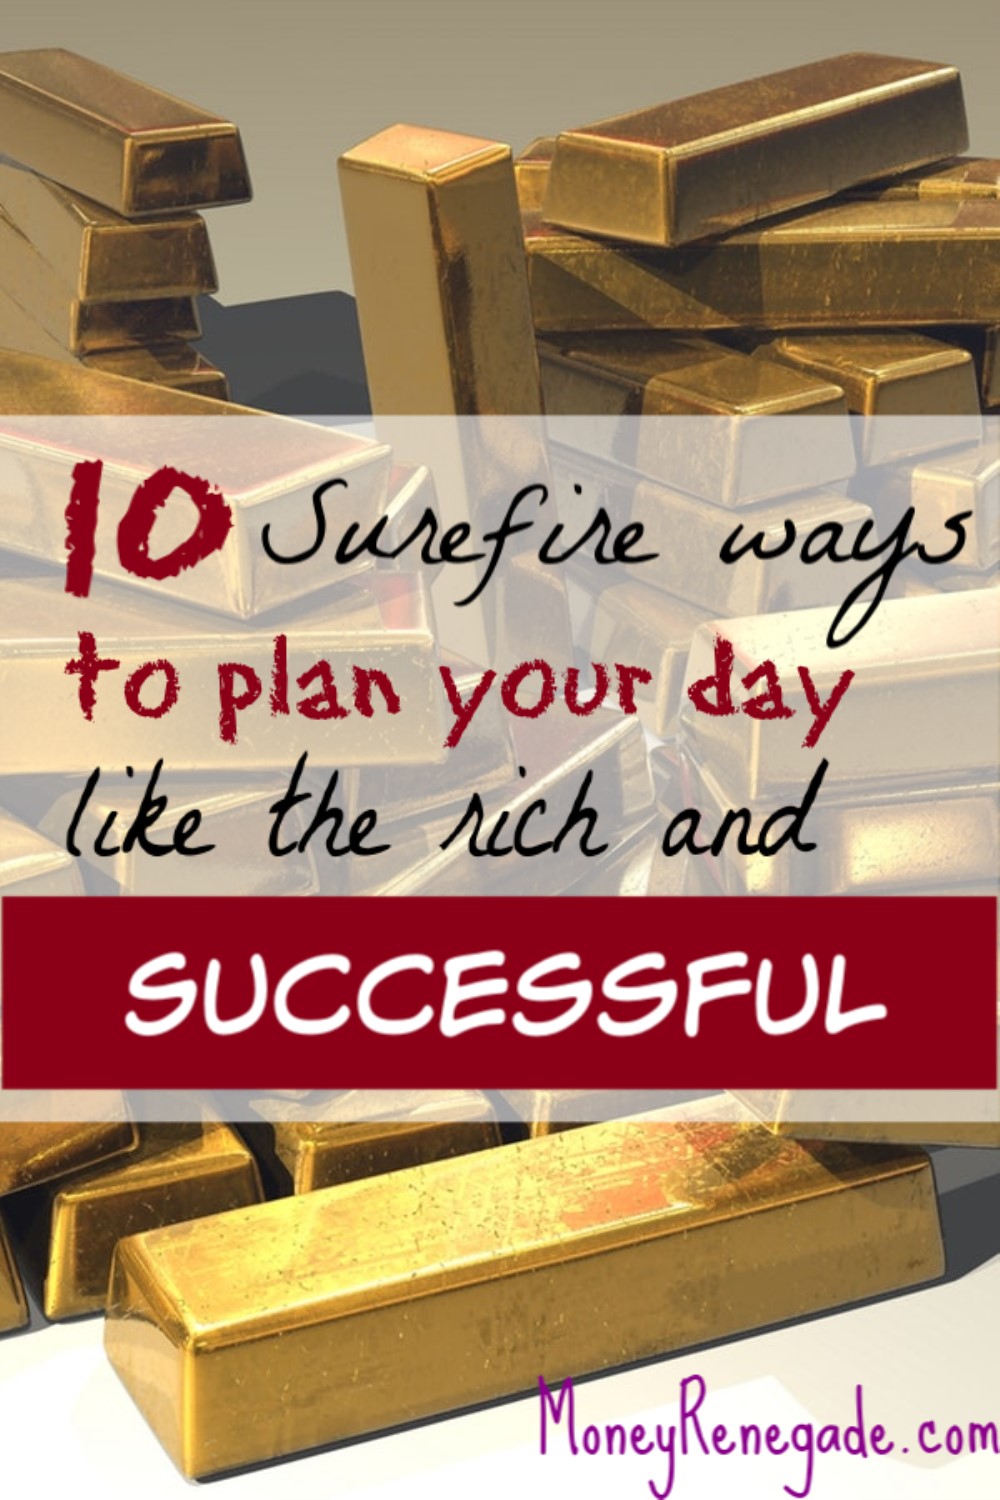 10 ways to plan your day like the rich